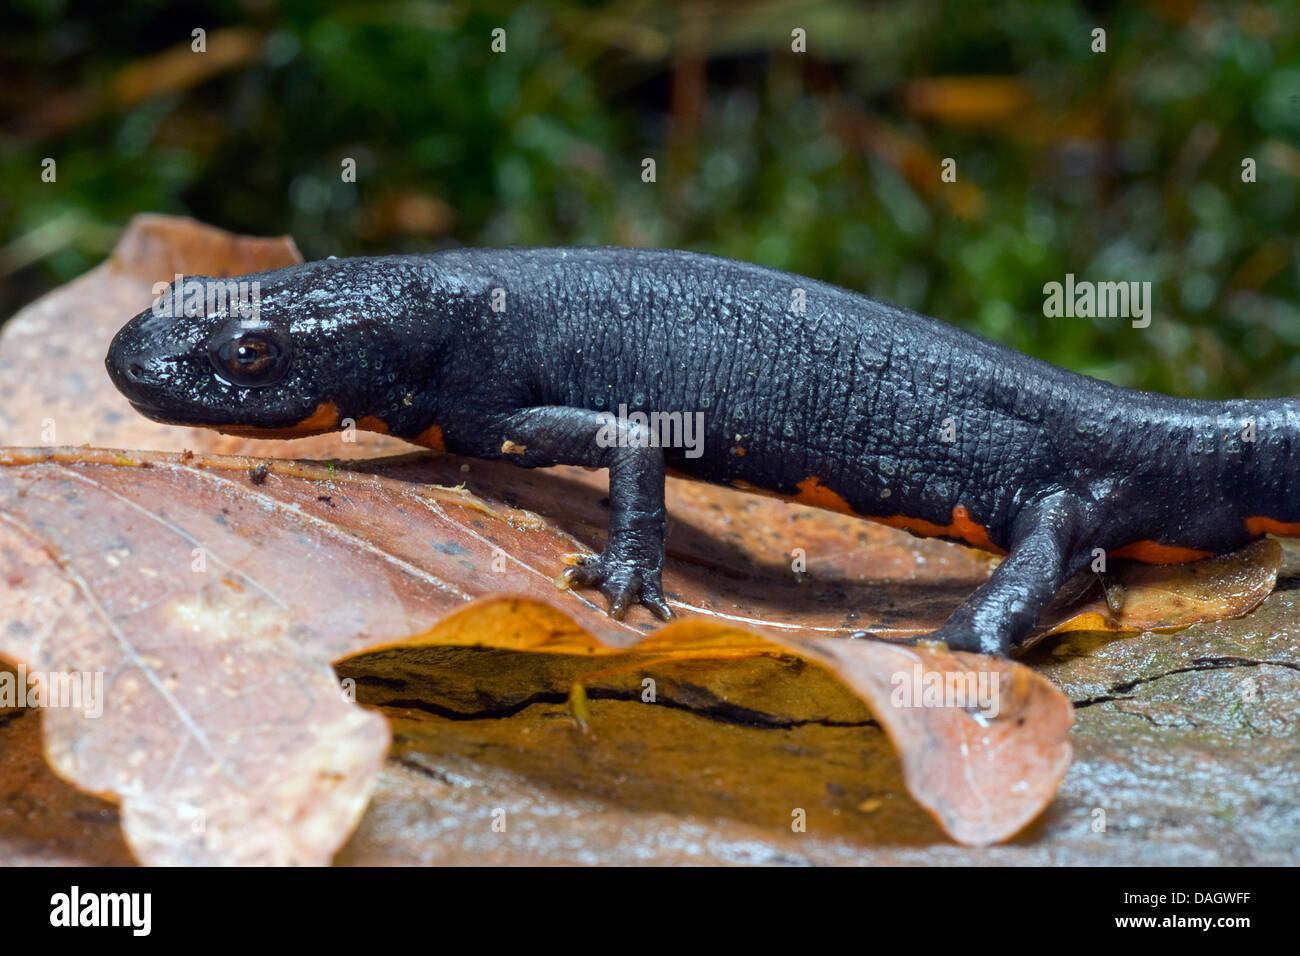 Chinese dwarf newt, Chinese fire bellied newt (Cynops orientalis), on brown leaf Stock Photo